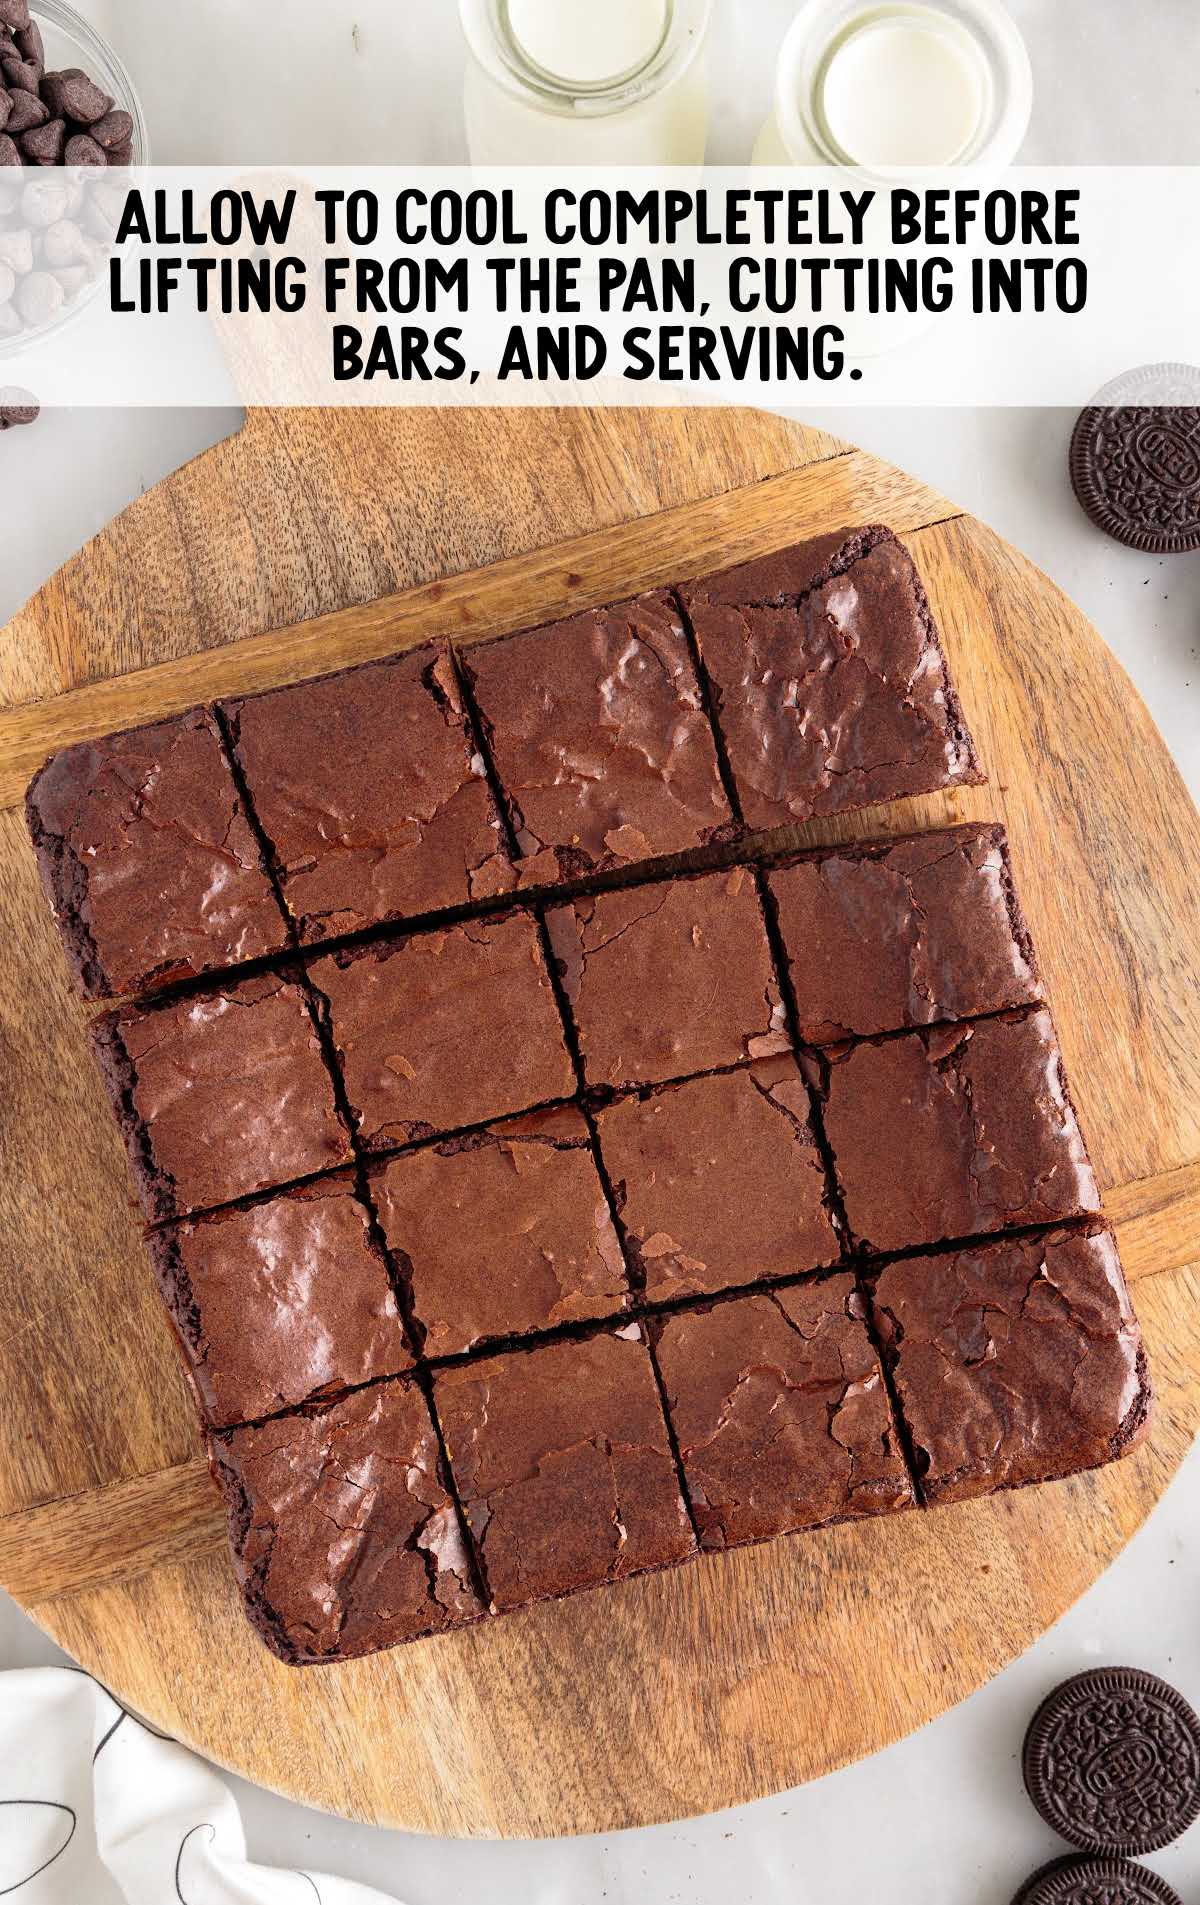 cut brownies into bars and allow to cool